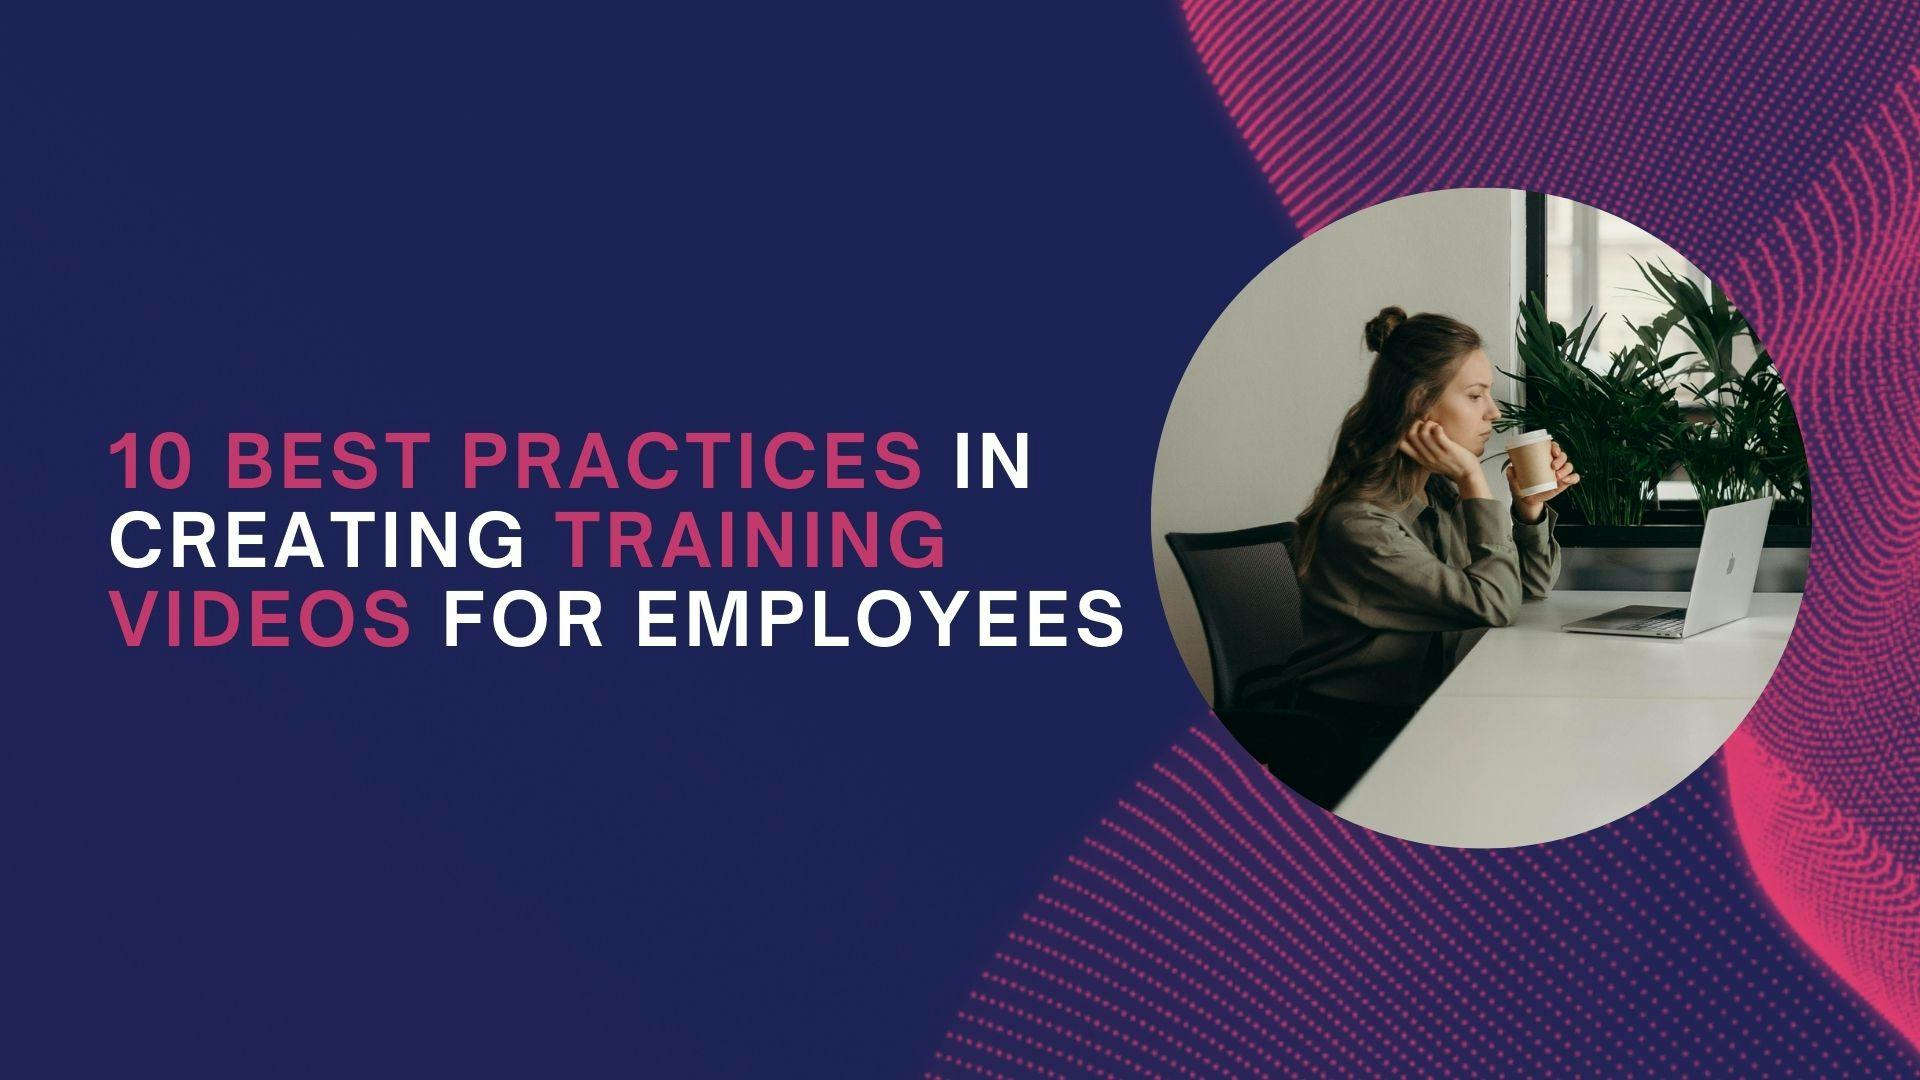 10 Best Practices to Create Training Videos for Employees – Puppetry